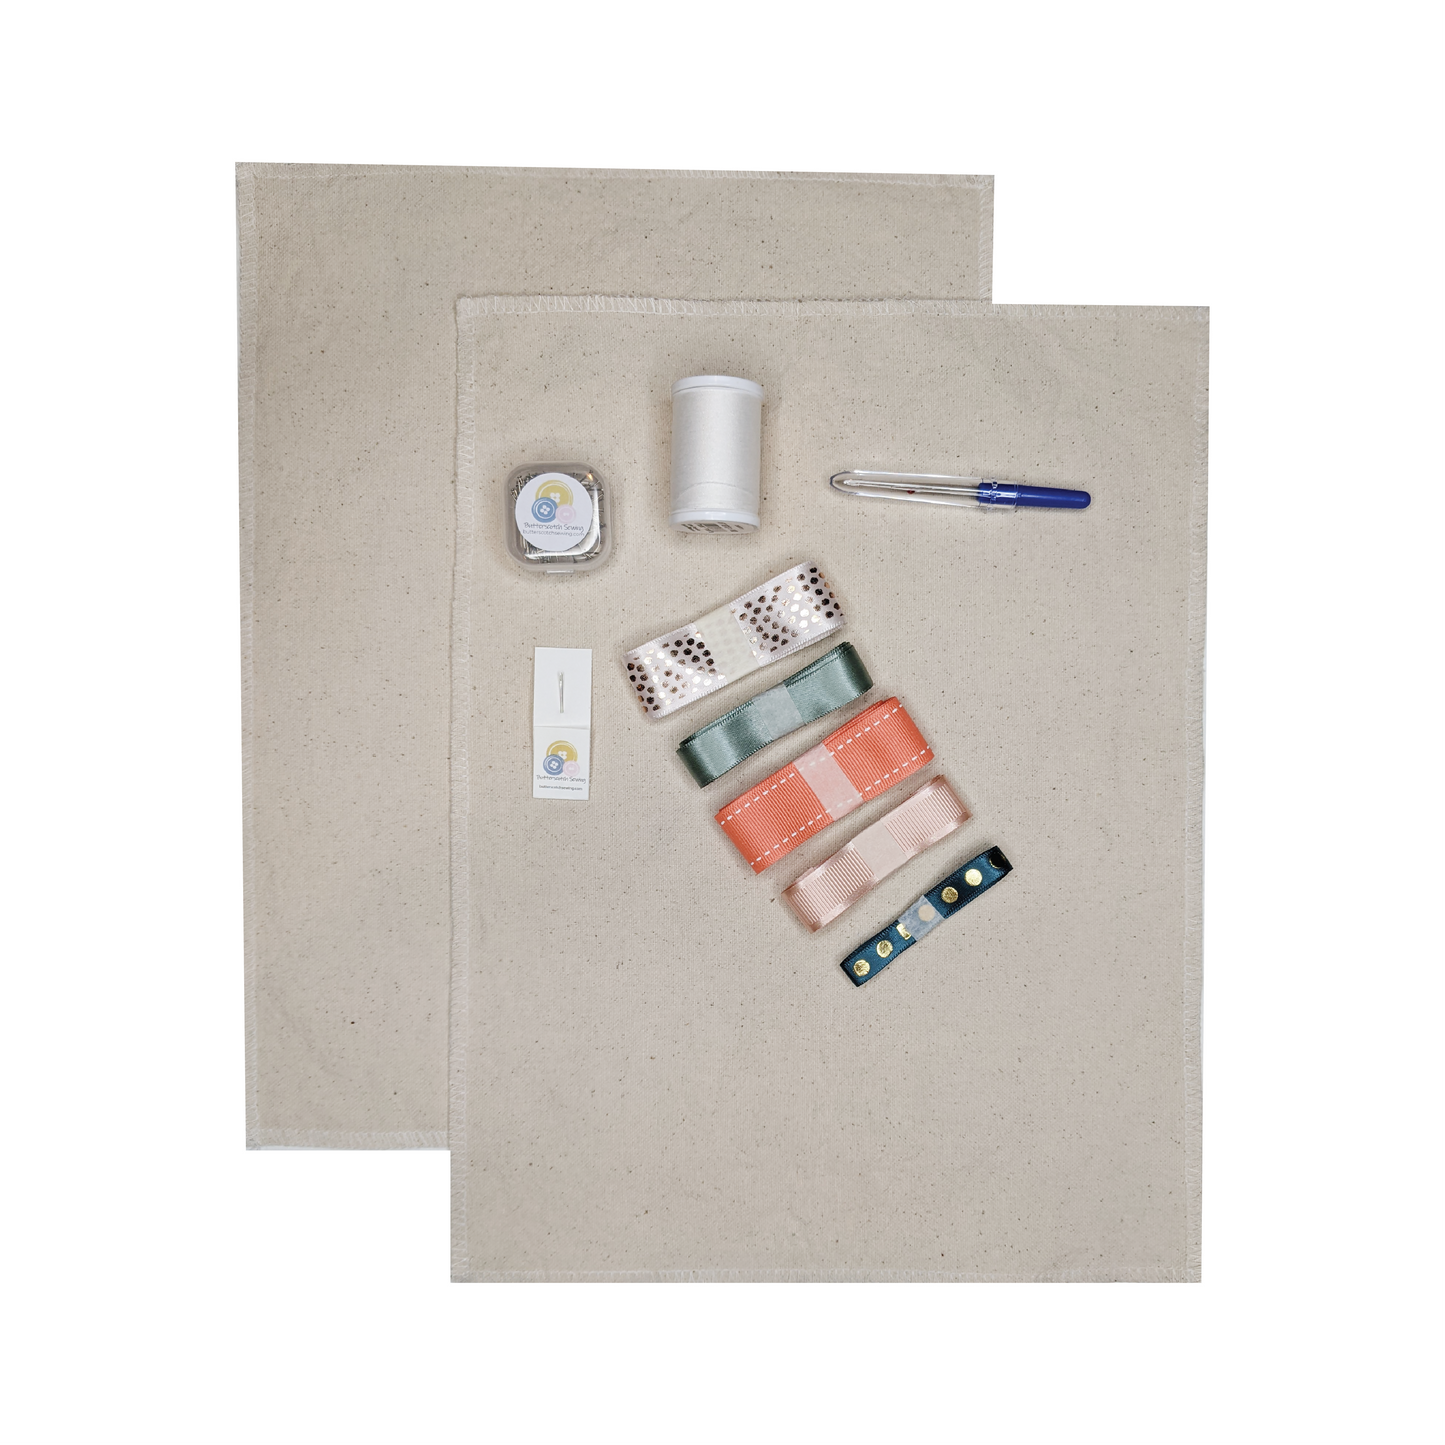 Product Image - The Tote - Peach - Kit Contents